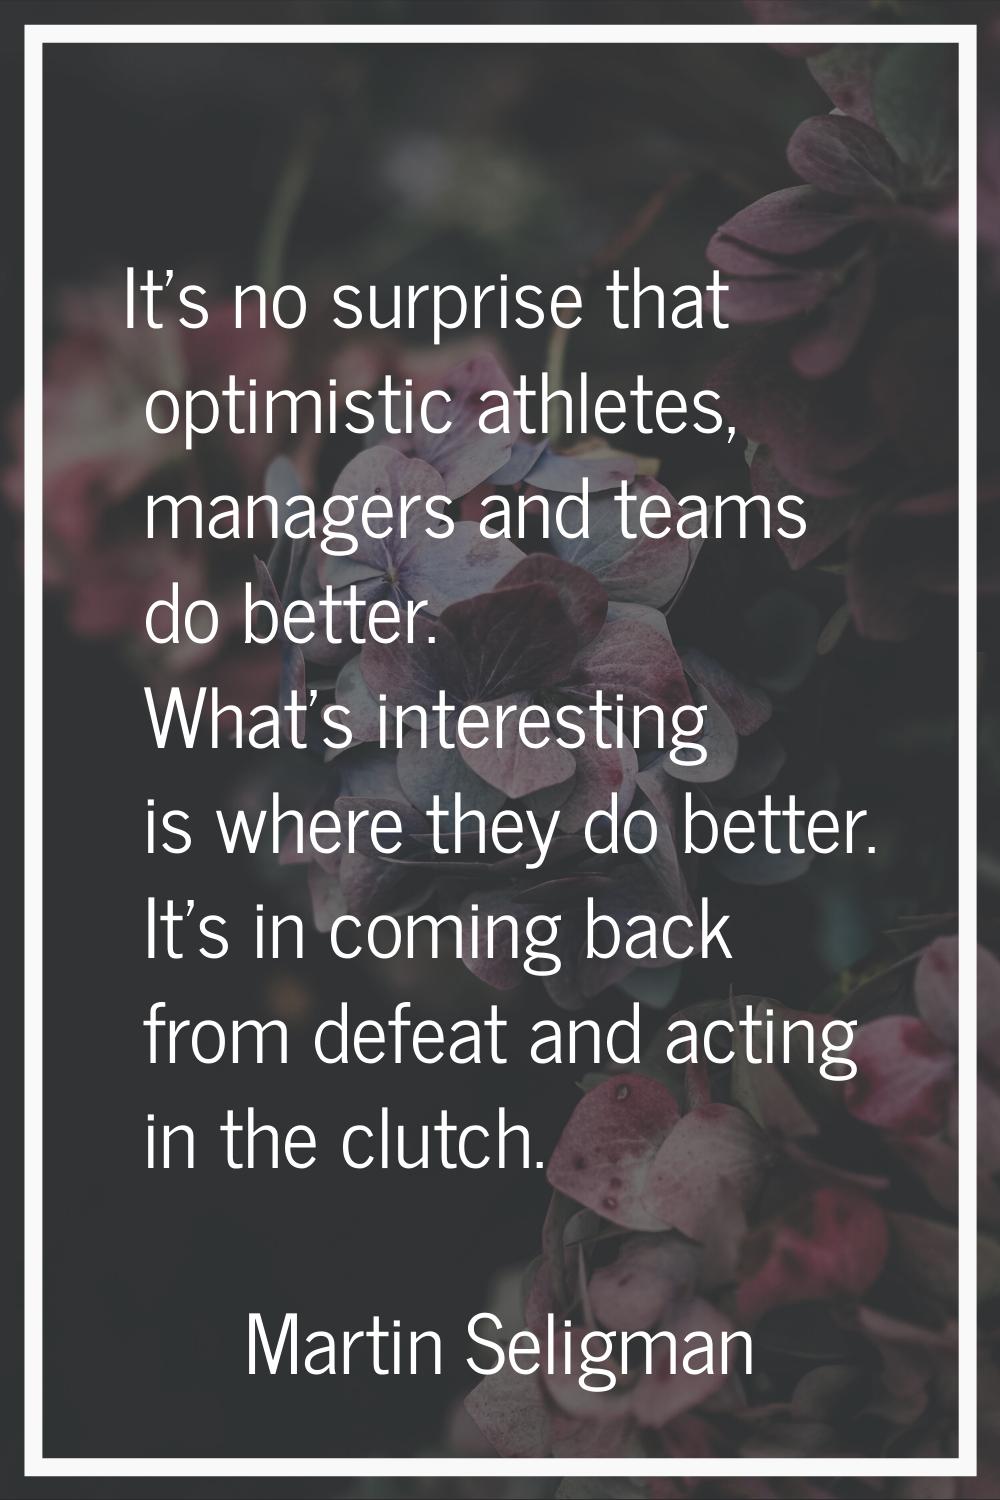 It's no surprise that optimistic athletes, managers and teams do better. What's interesting is wher